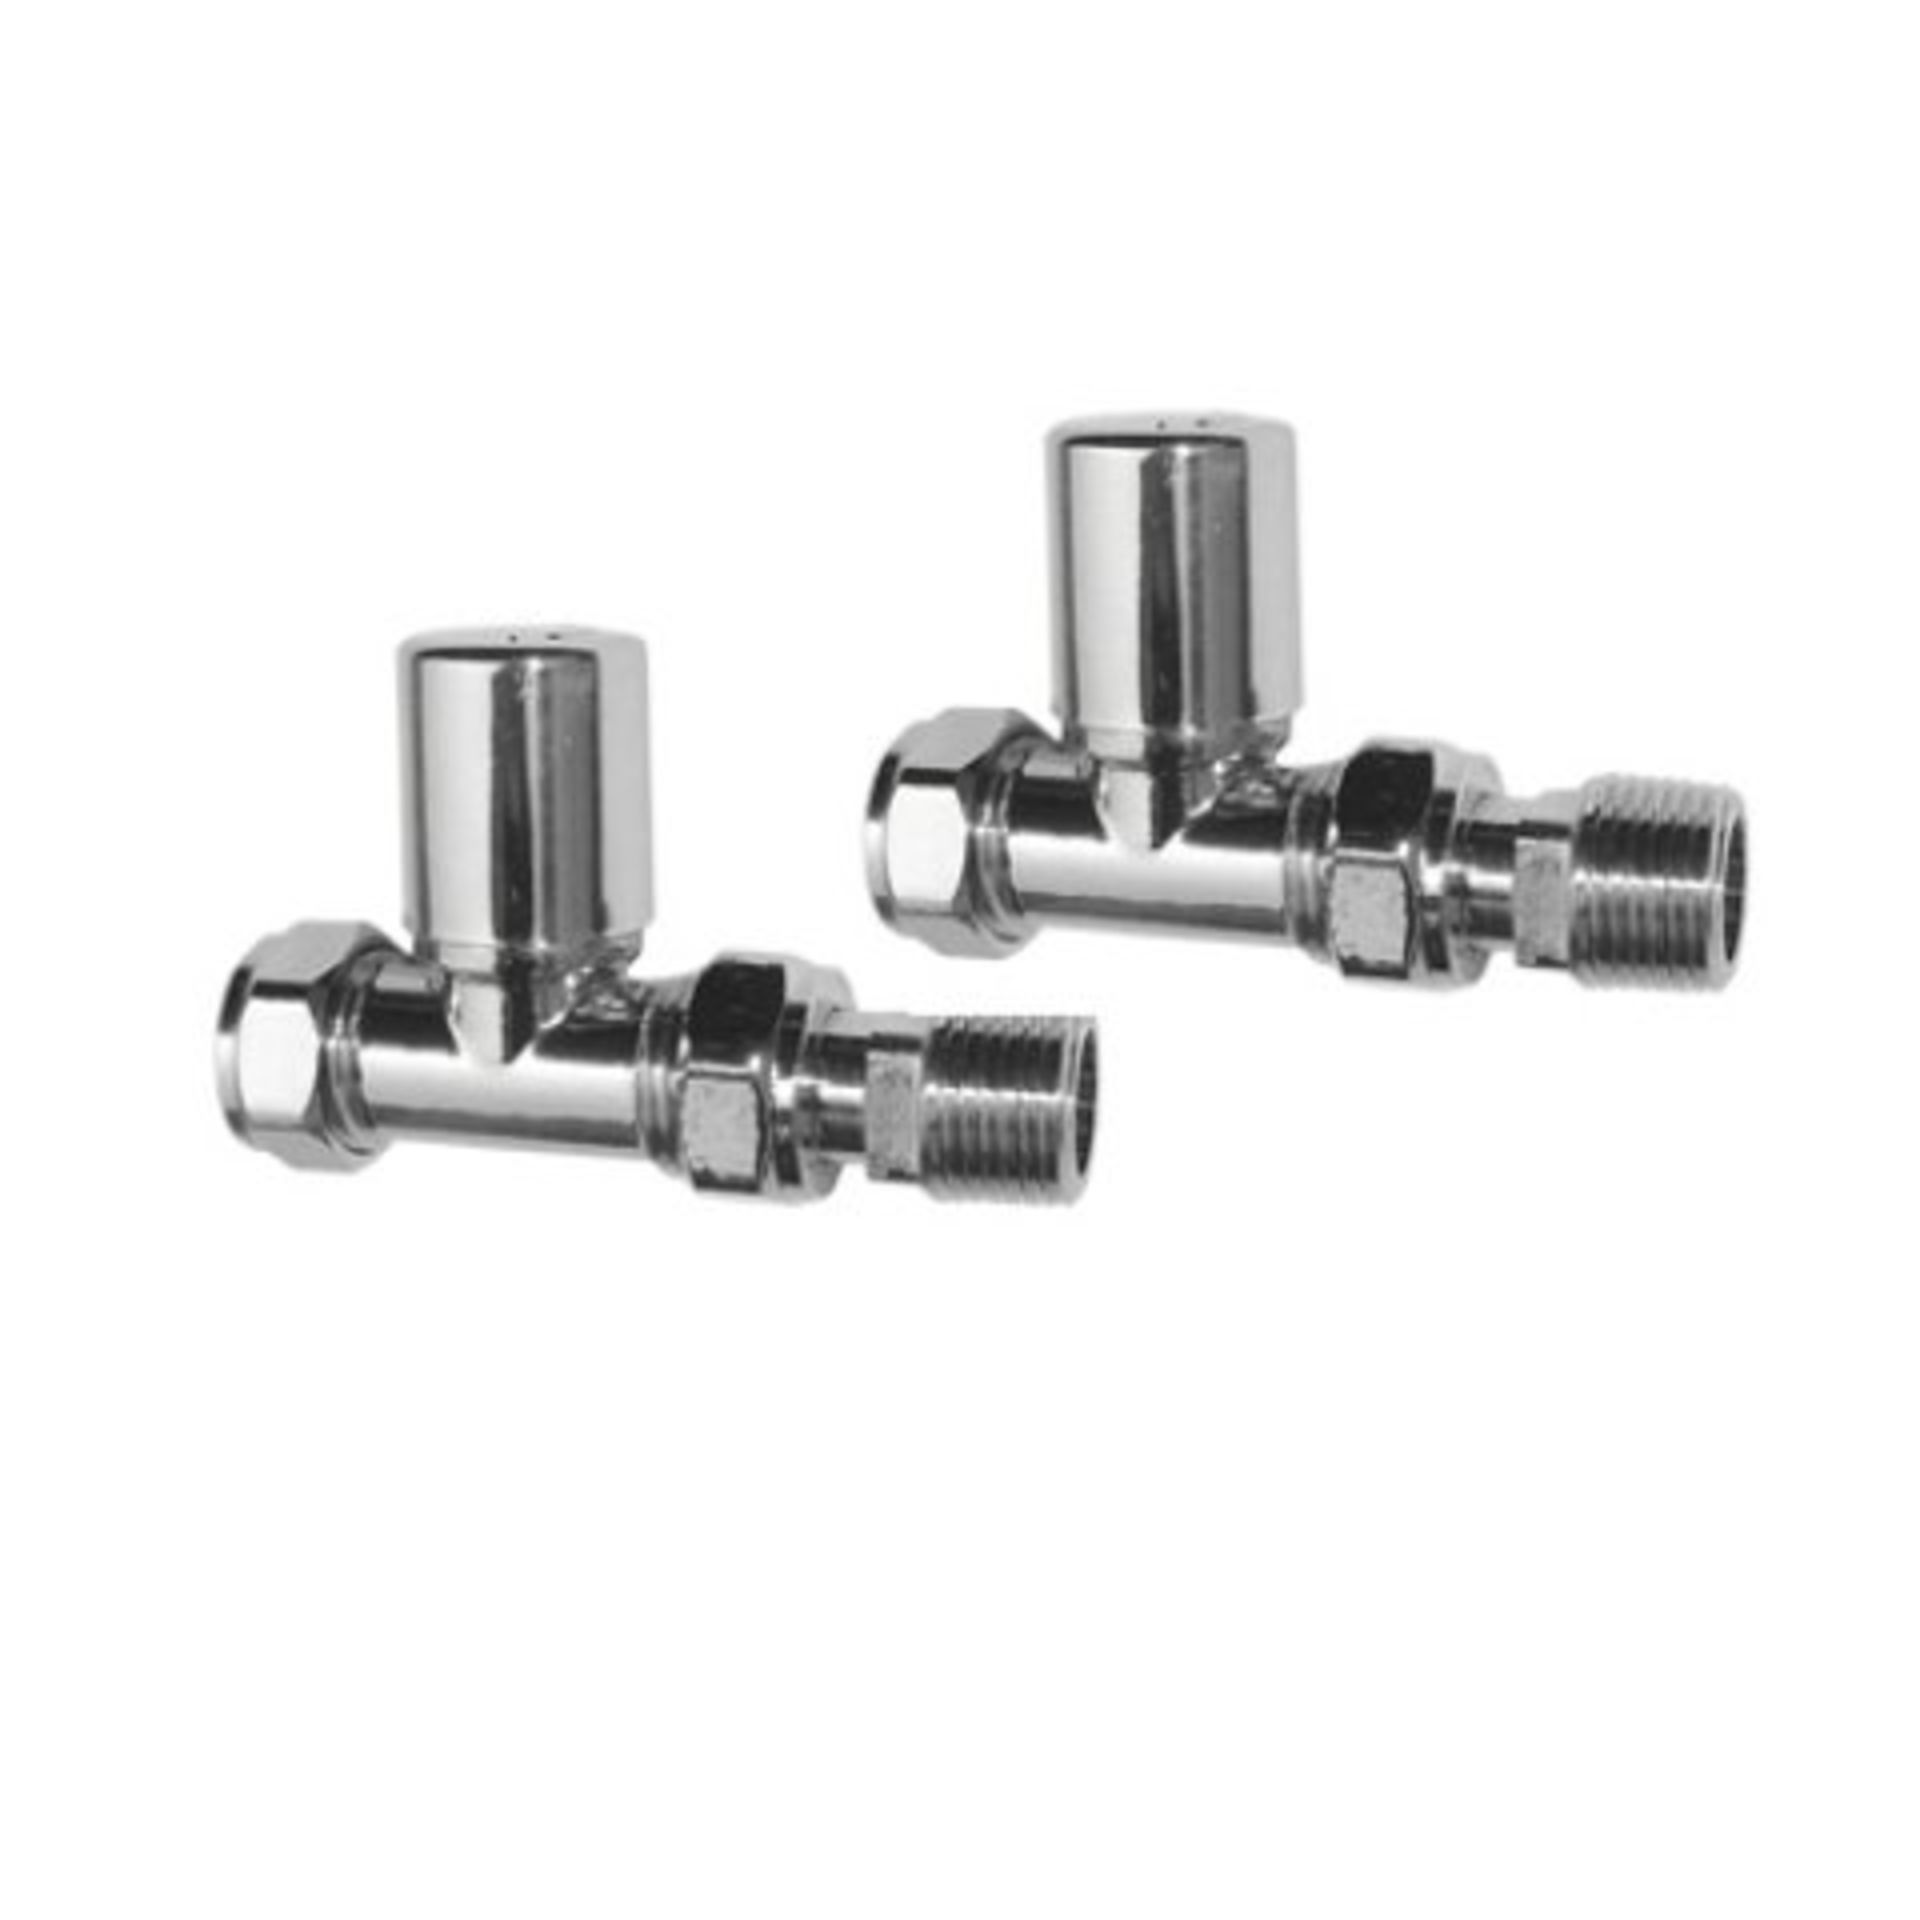 (I227) Standard 15mm Connection Straight Chrome Radiator Valves Made of solid brass, our Straight